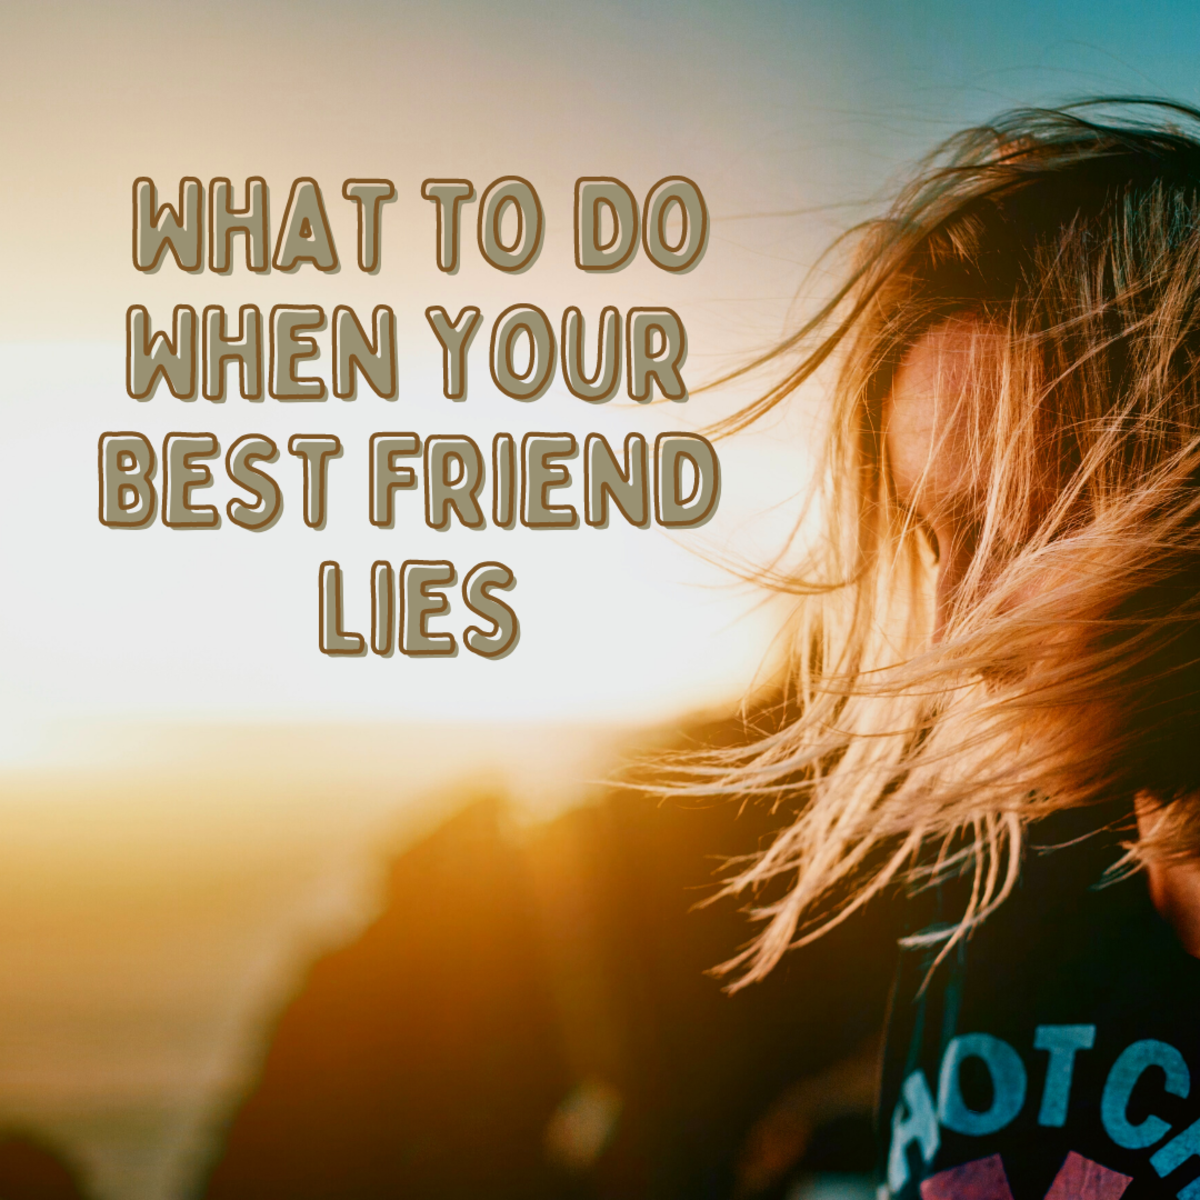 How can you move past your best friend being dishonest with you?